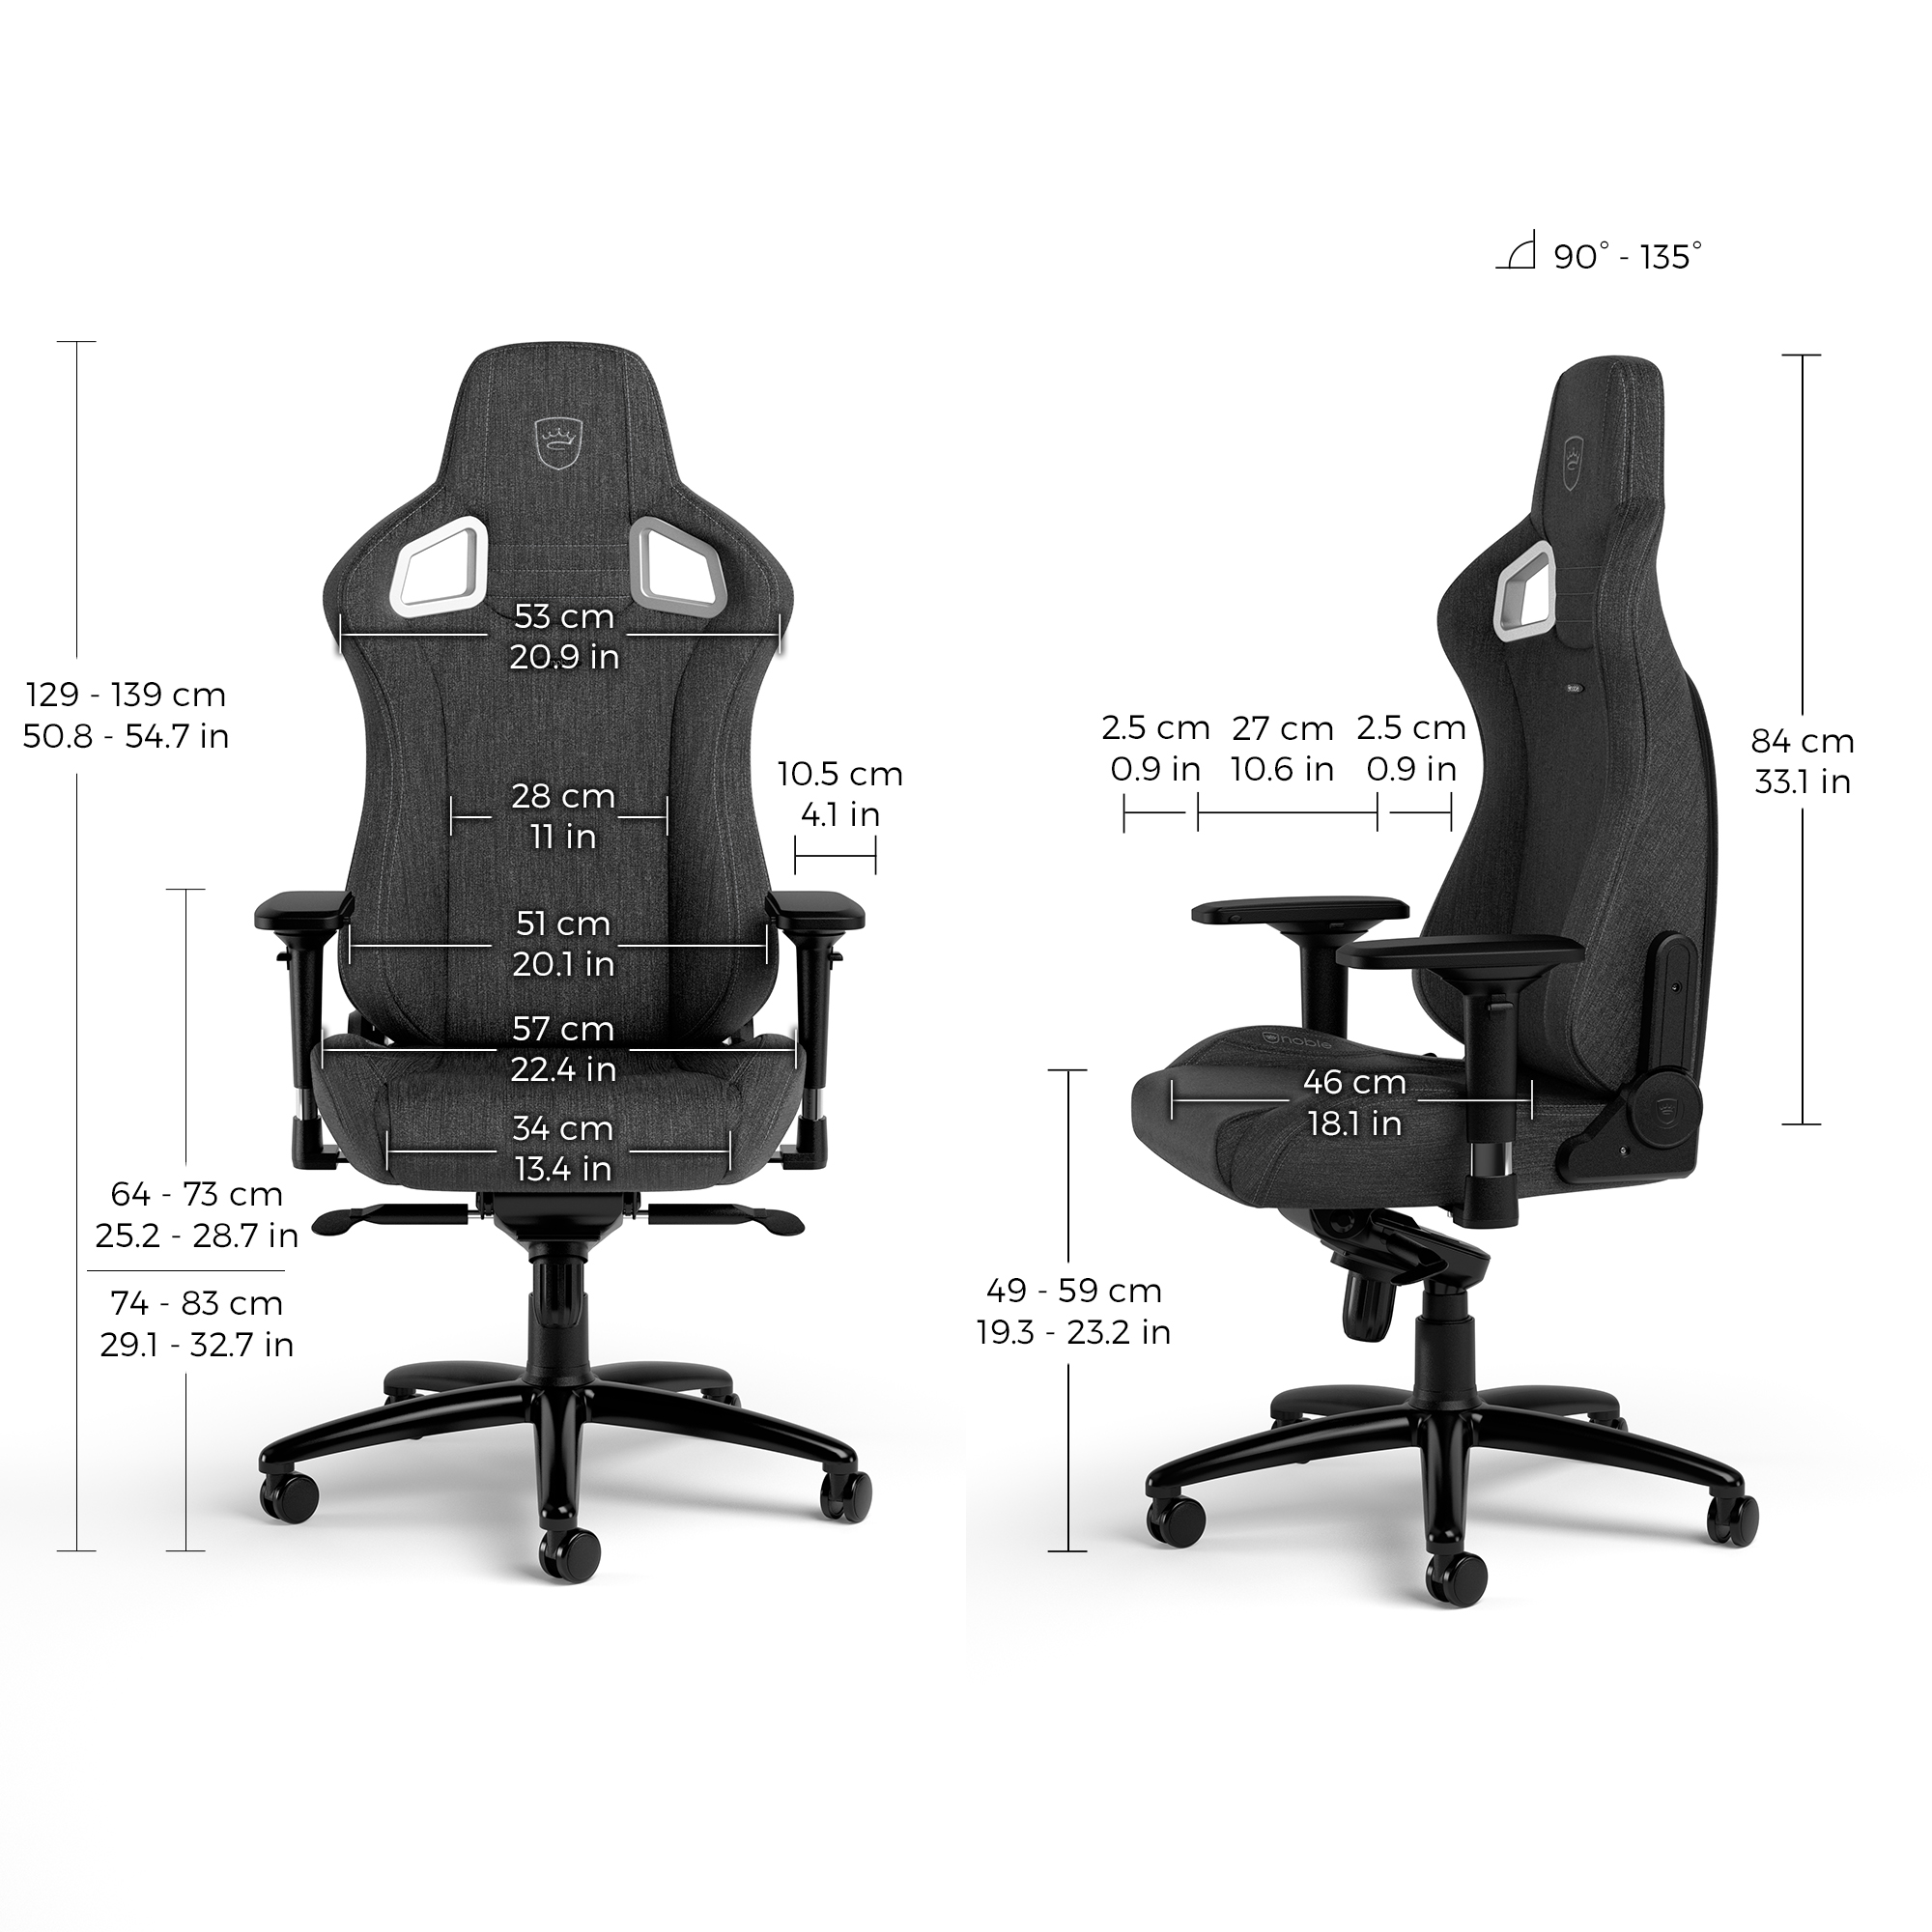 noblechairs - noblechairs EPIC TX Gaming Chair - Anthracite Fabric Gaming Chair